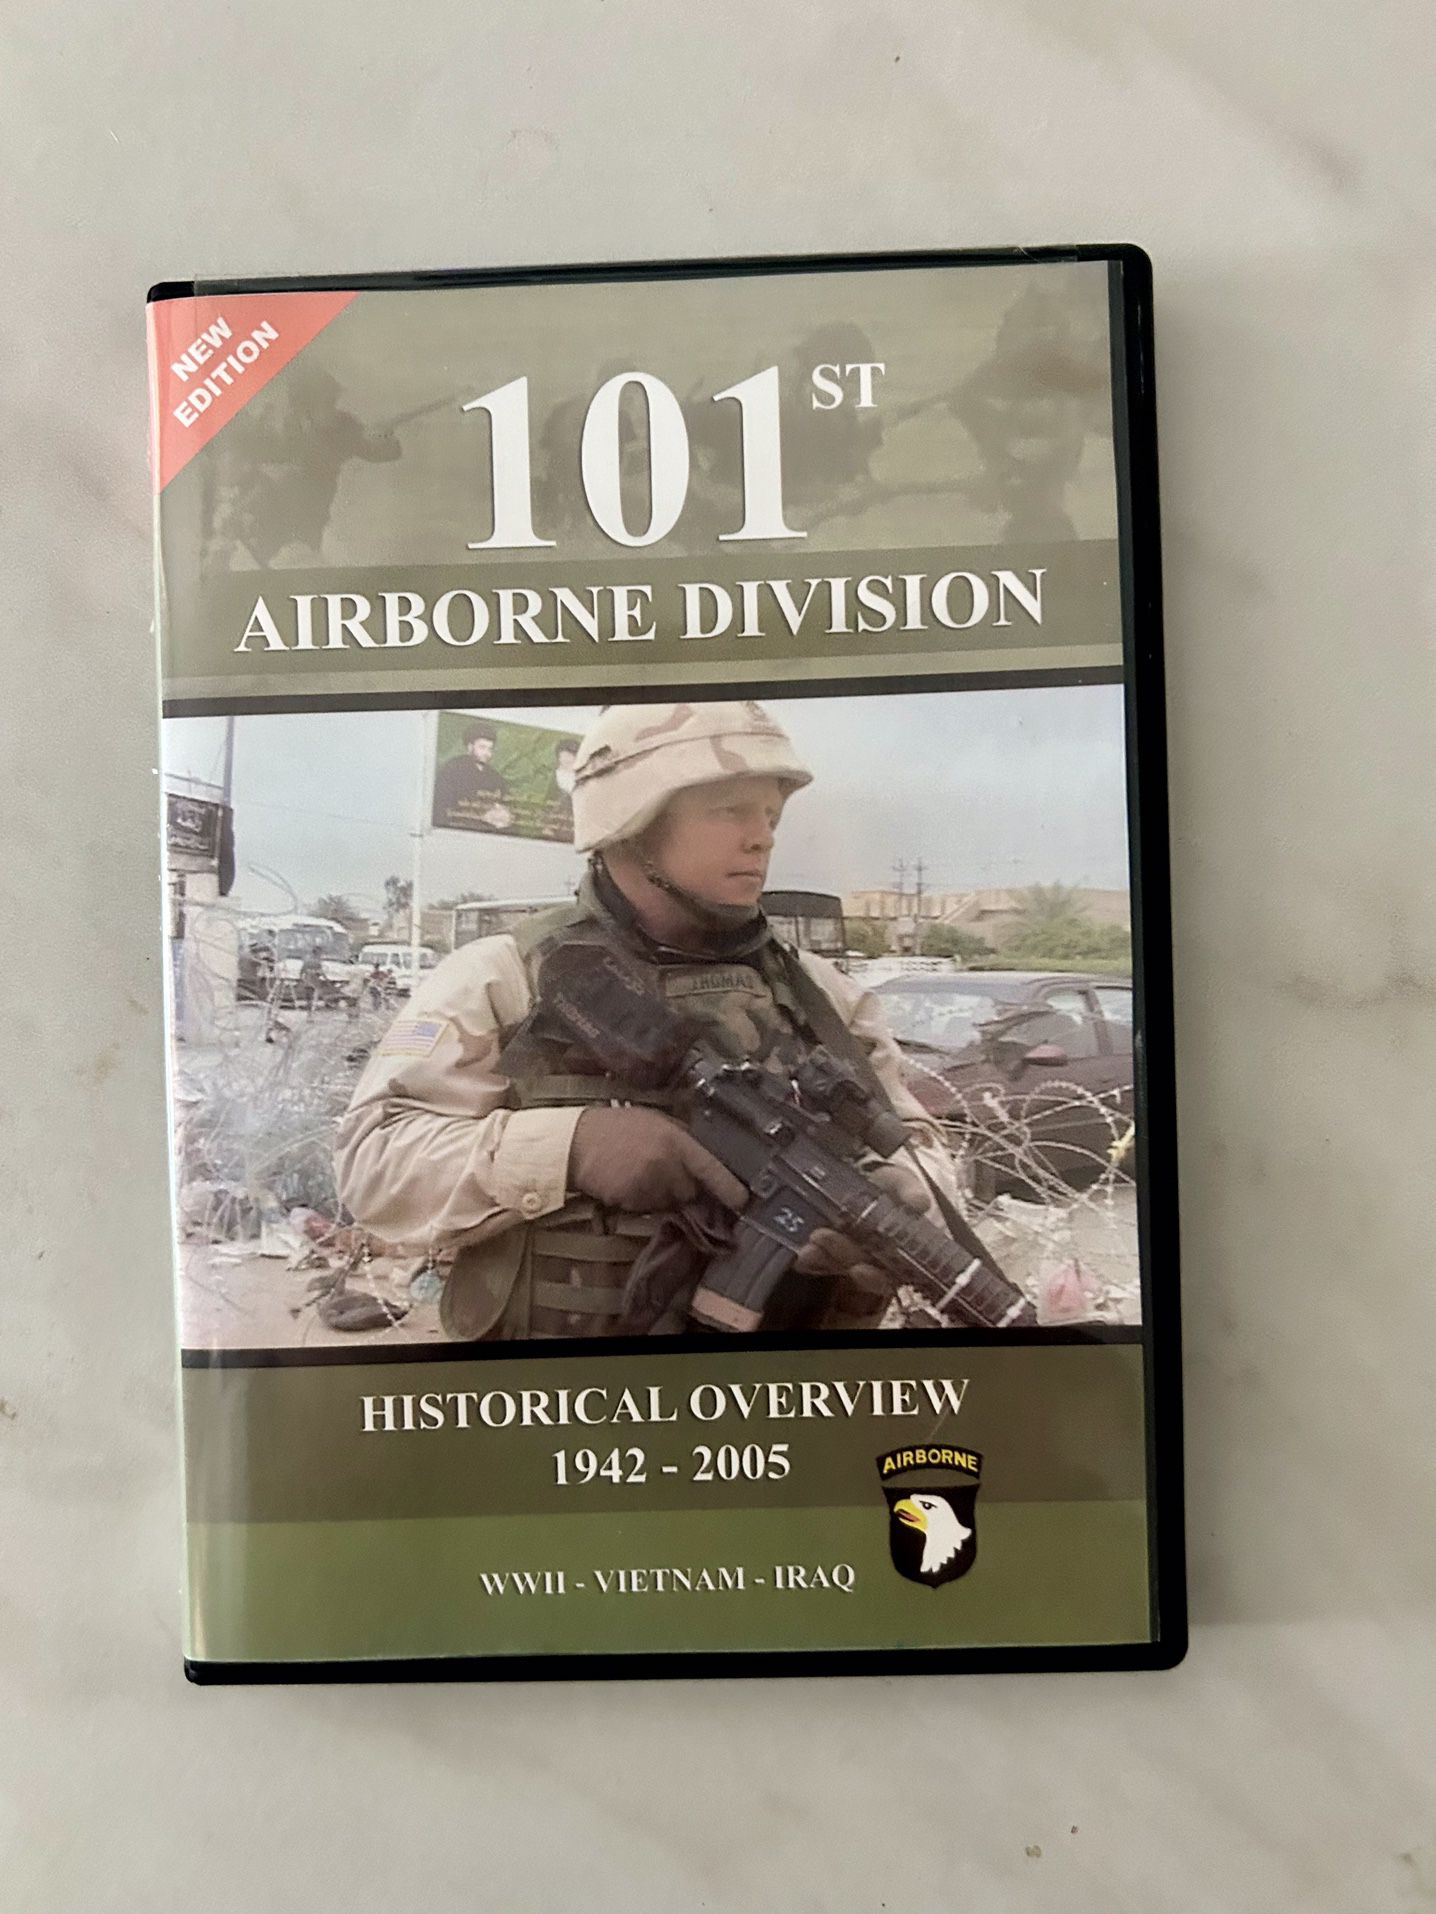 101st Airborne Division DVD Historical Overview 1(contact info removed)